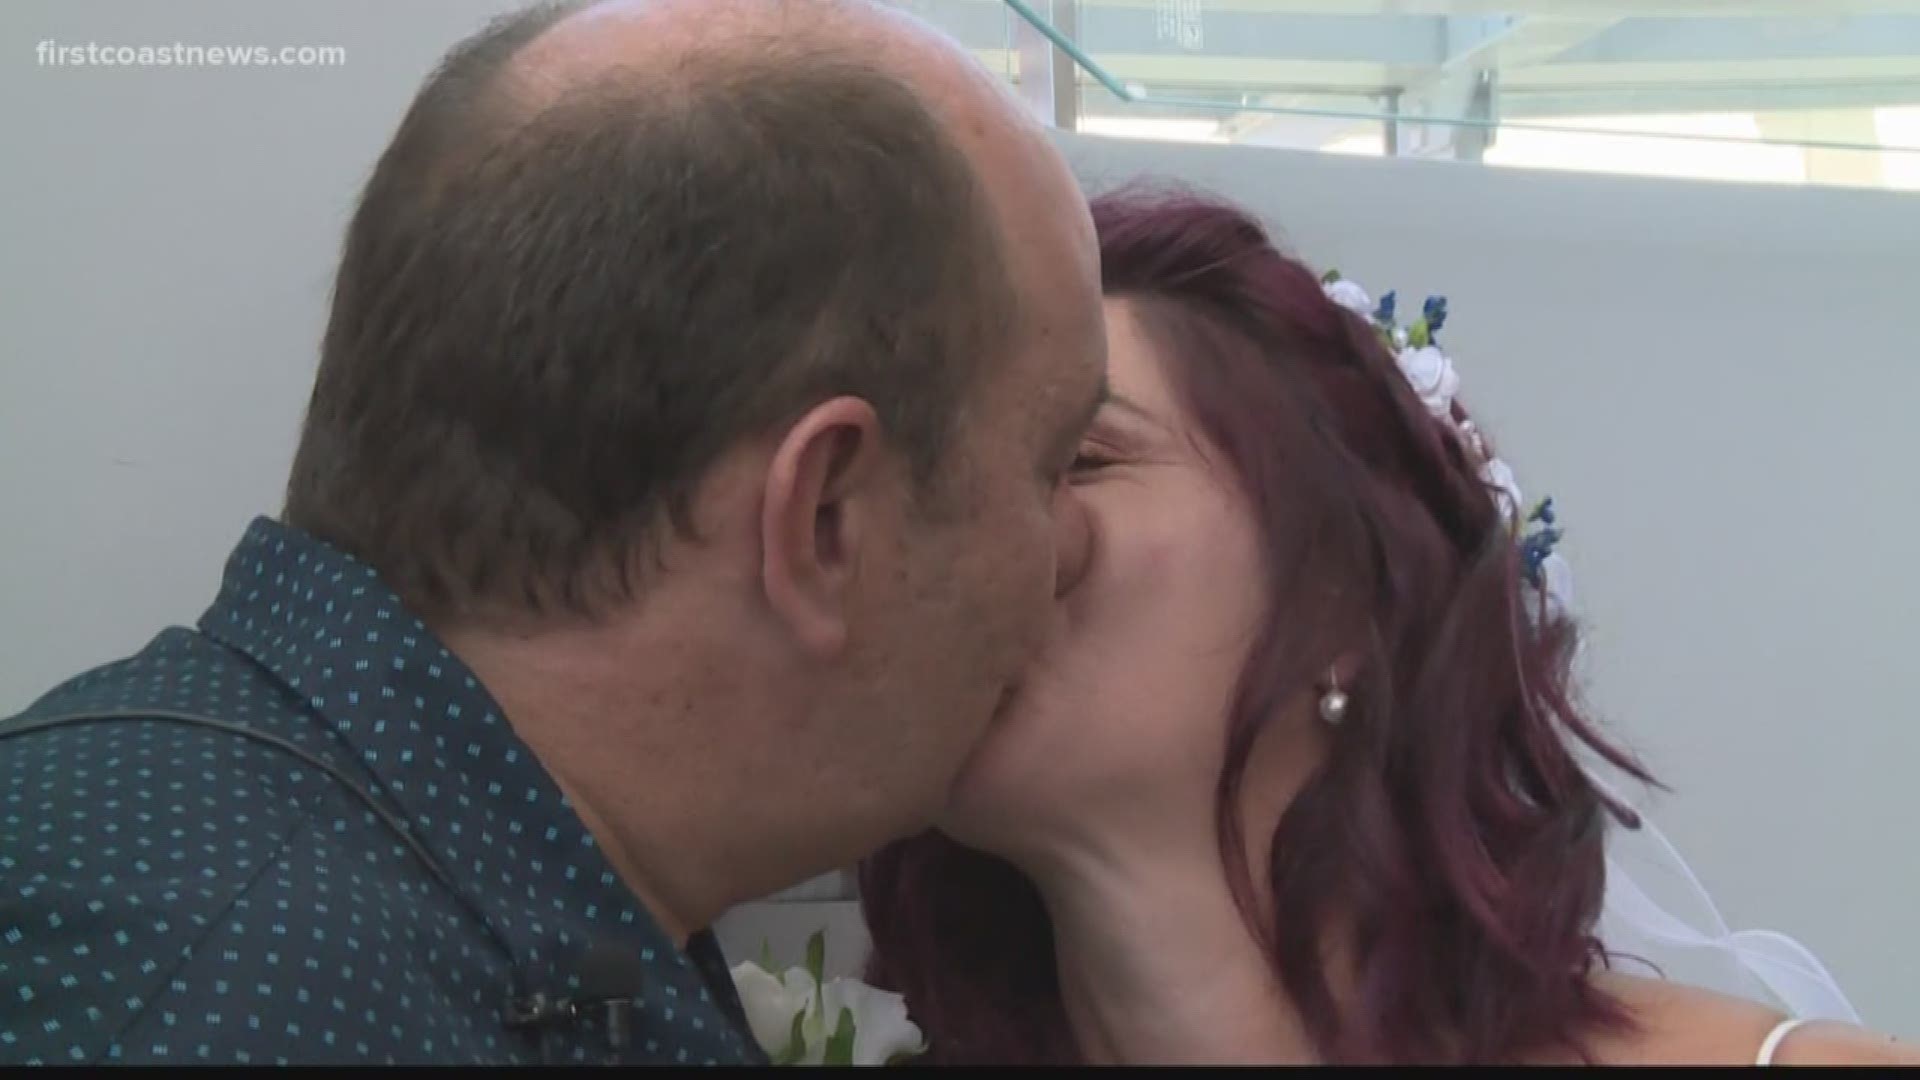 A couple in love fighting cancer got married at UF Proton Therapy Institute in Jacksonville.